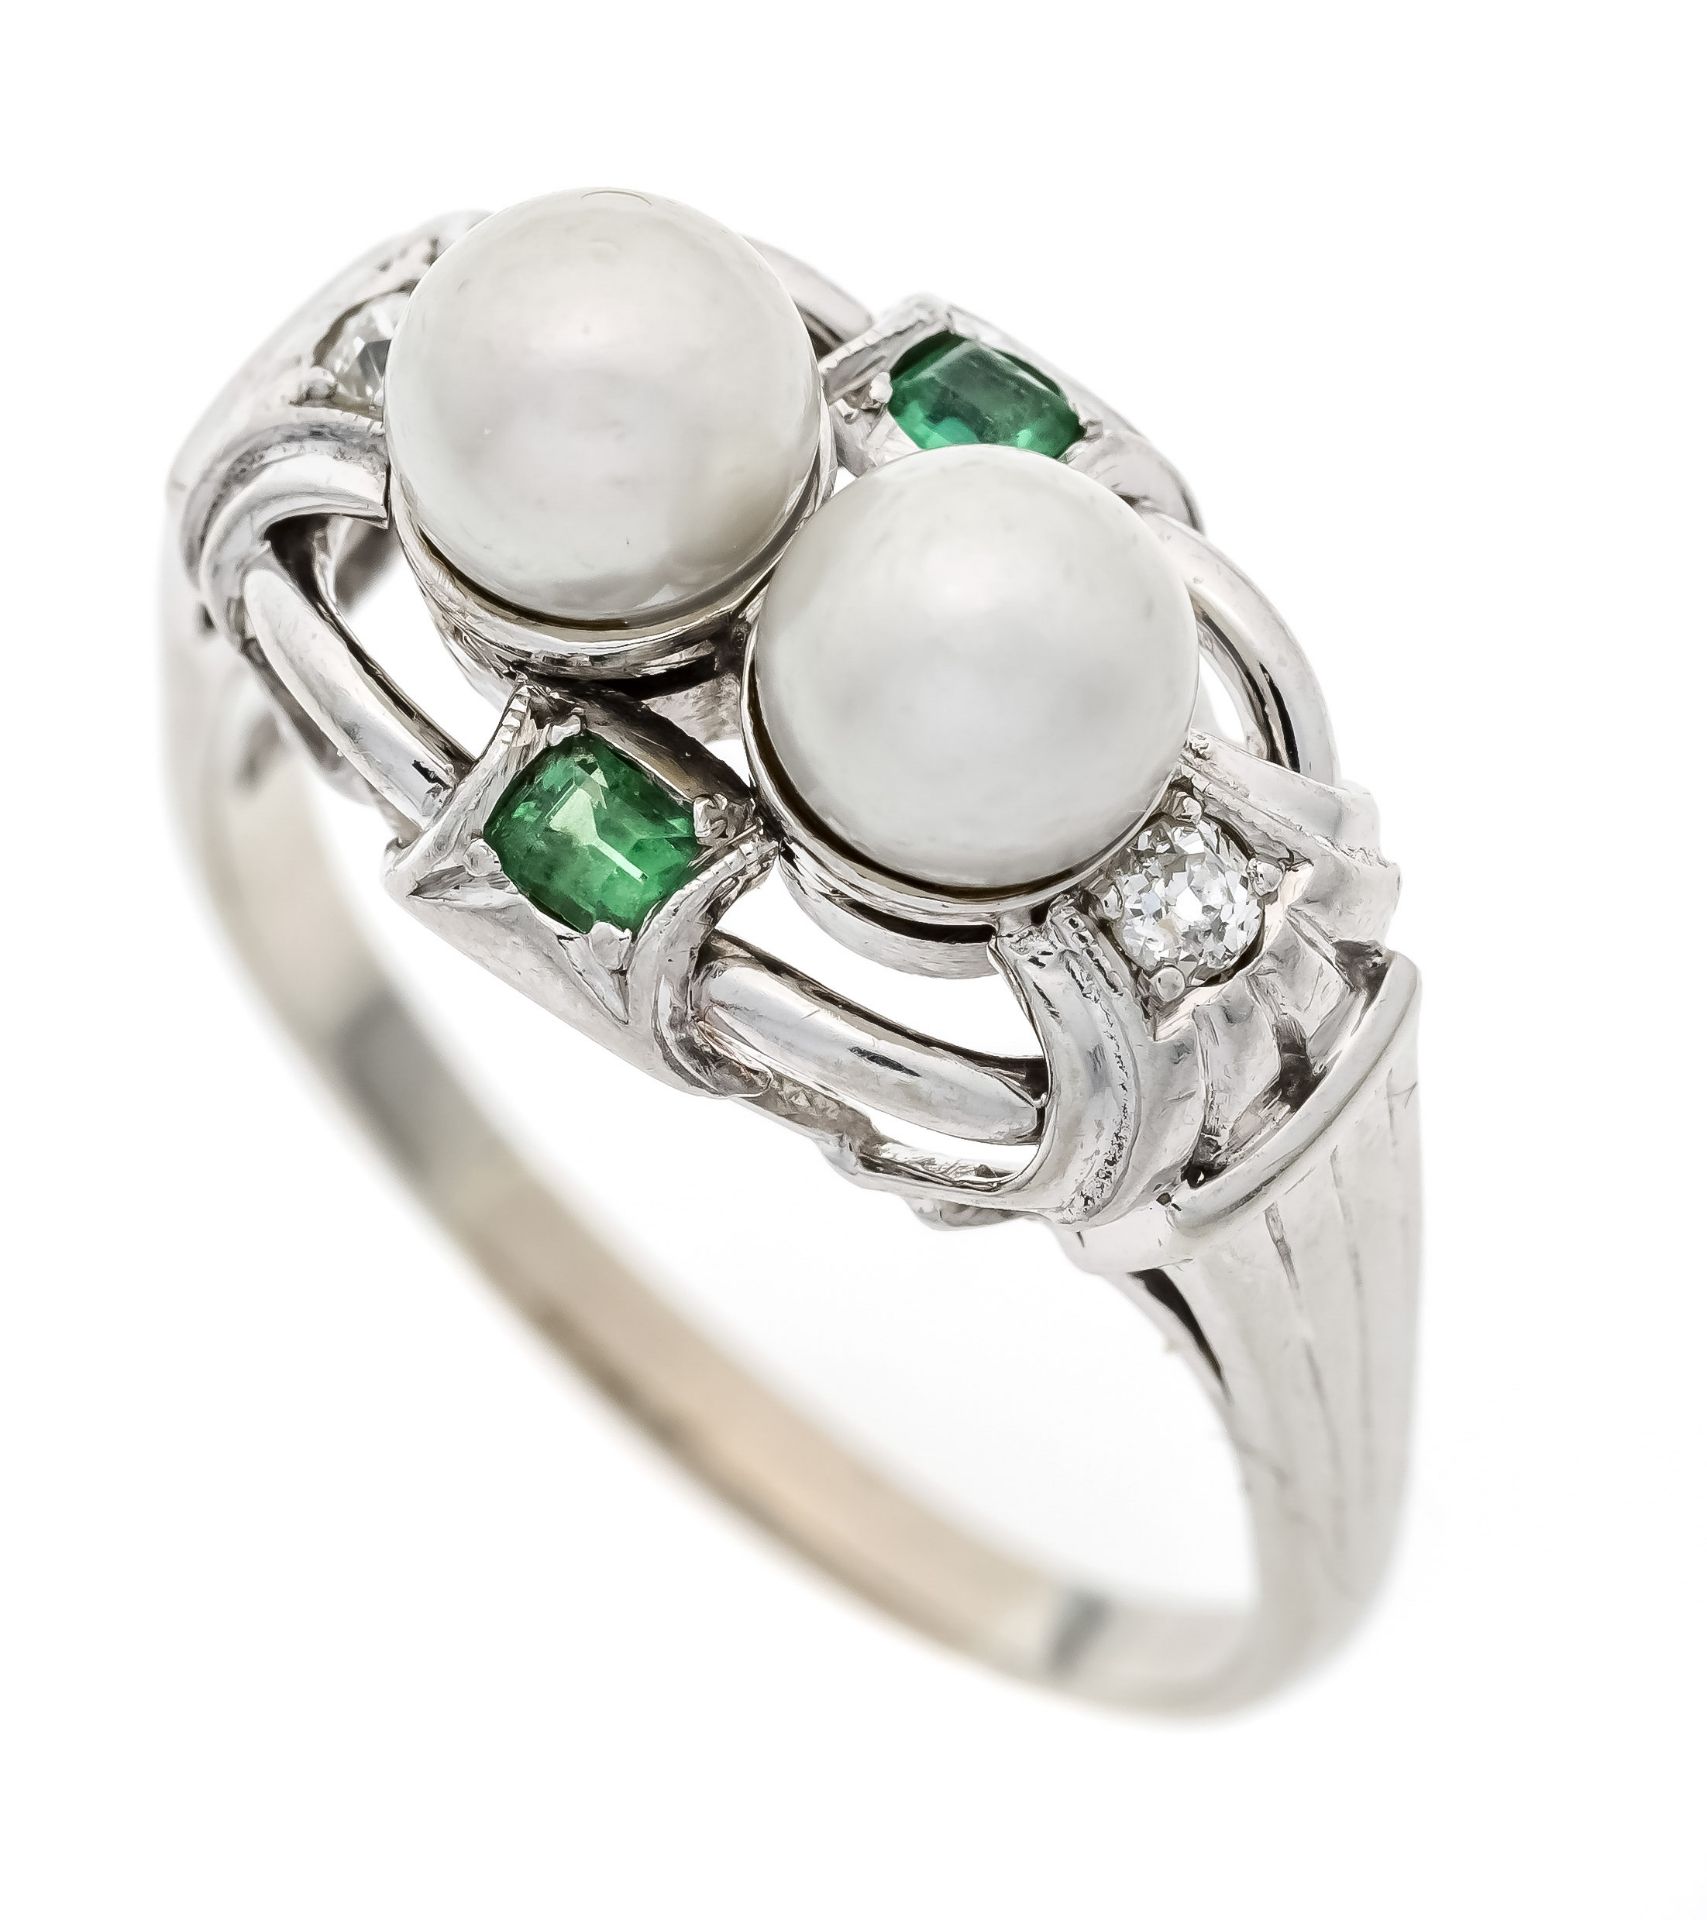 Akoya pearl emerald ring circa 1930 WG 585/000 with 2 white Akoya pearls 5.4 mm, 2 faceted emerald